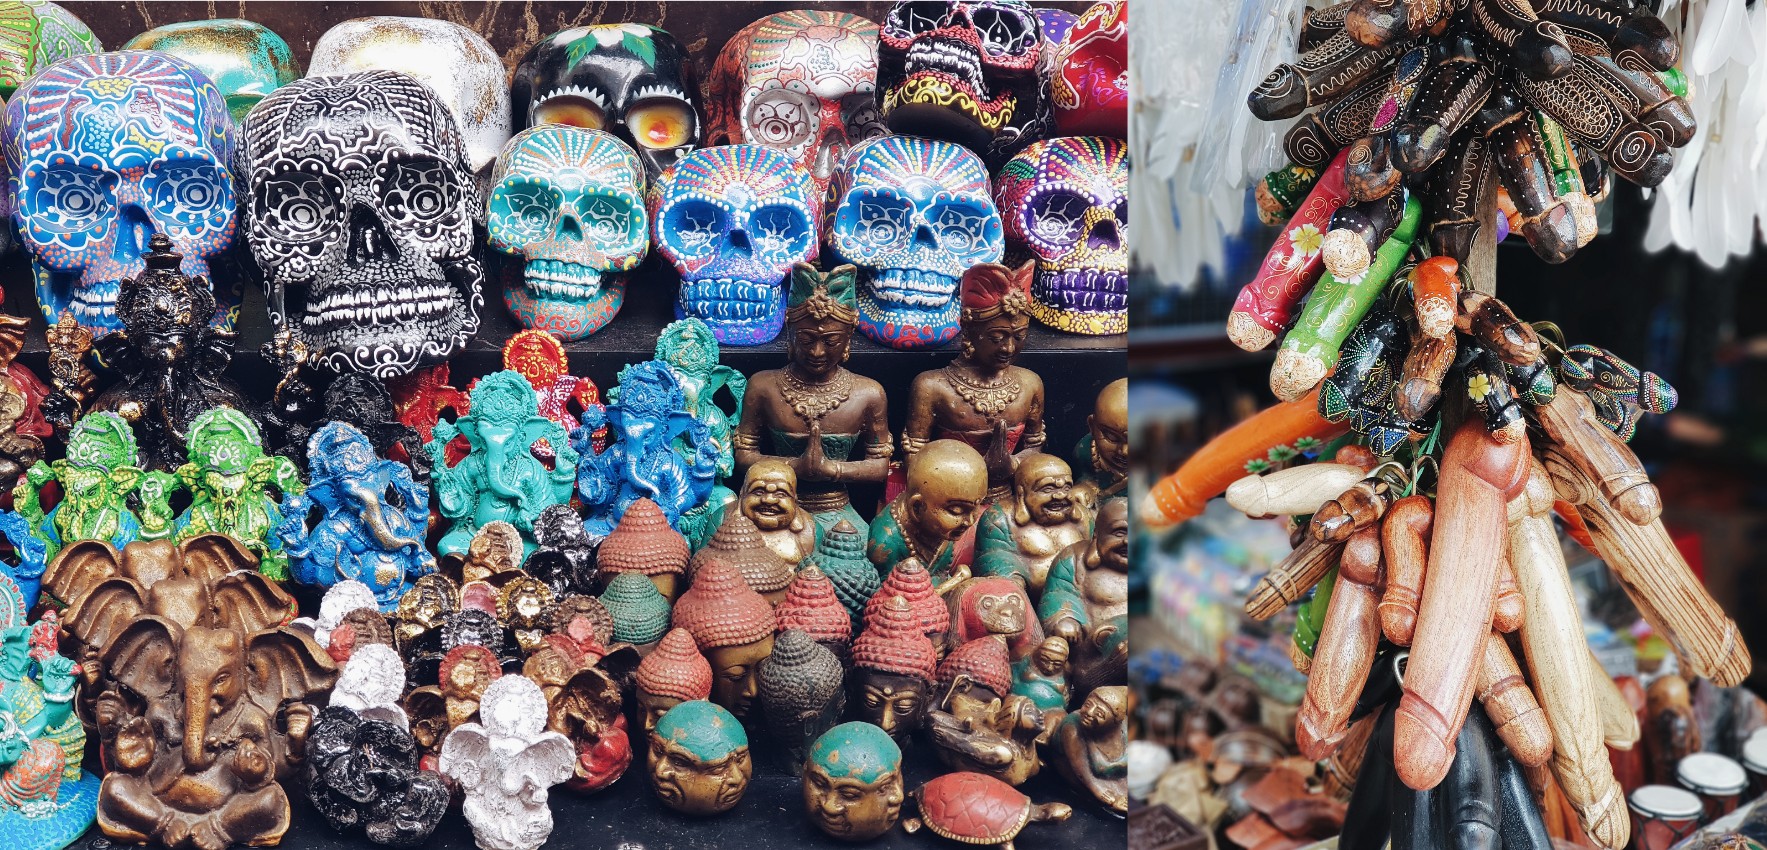 A Guide to Shopping in Ubud